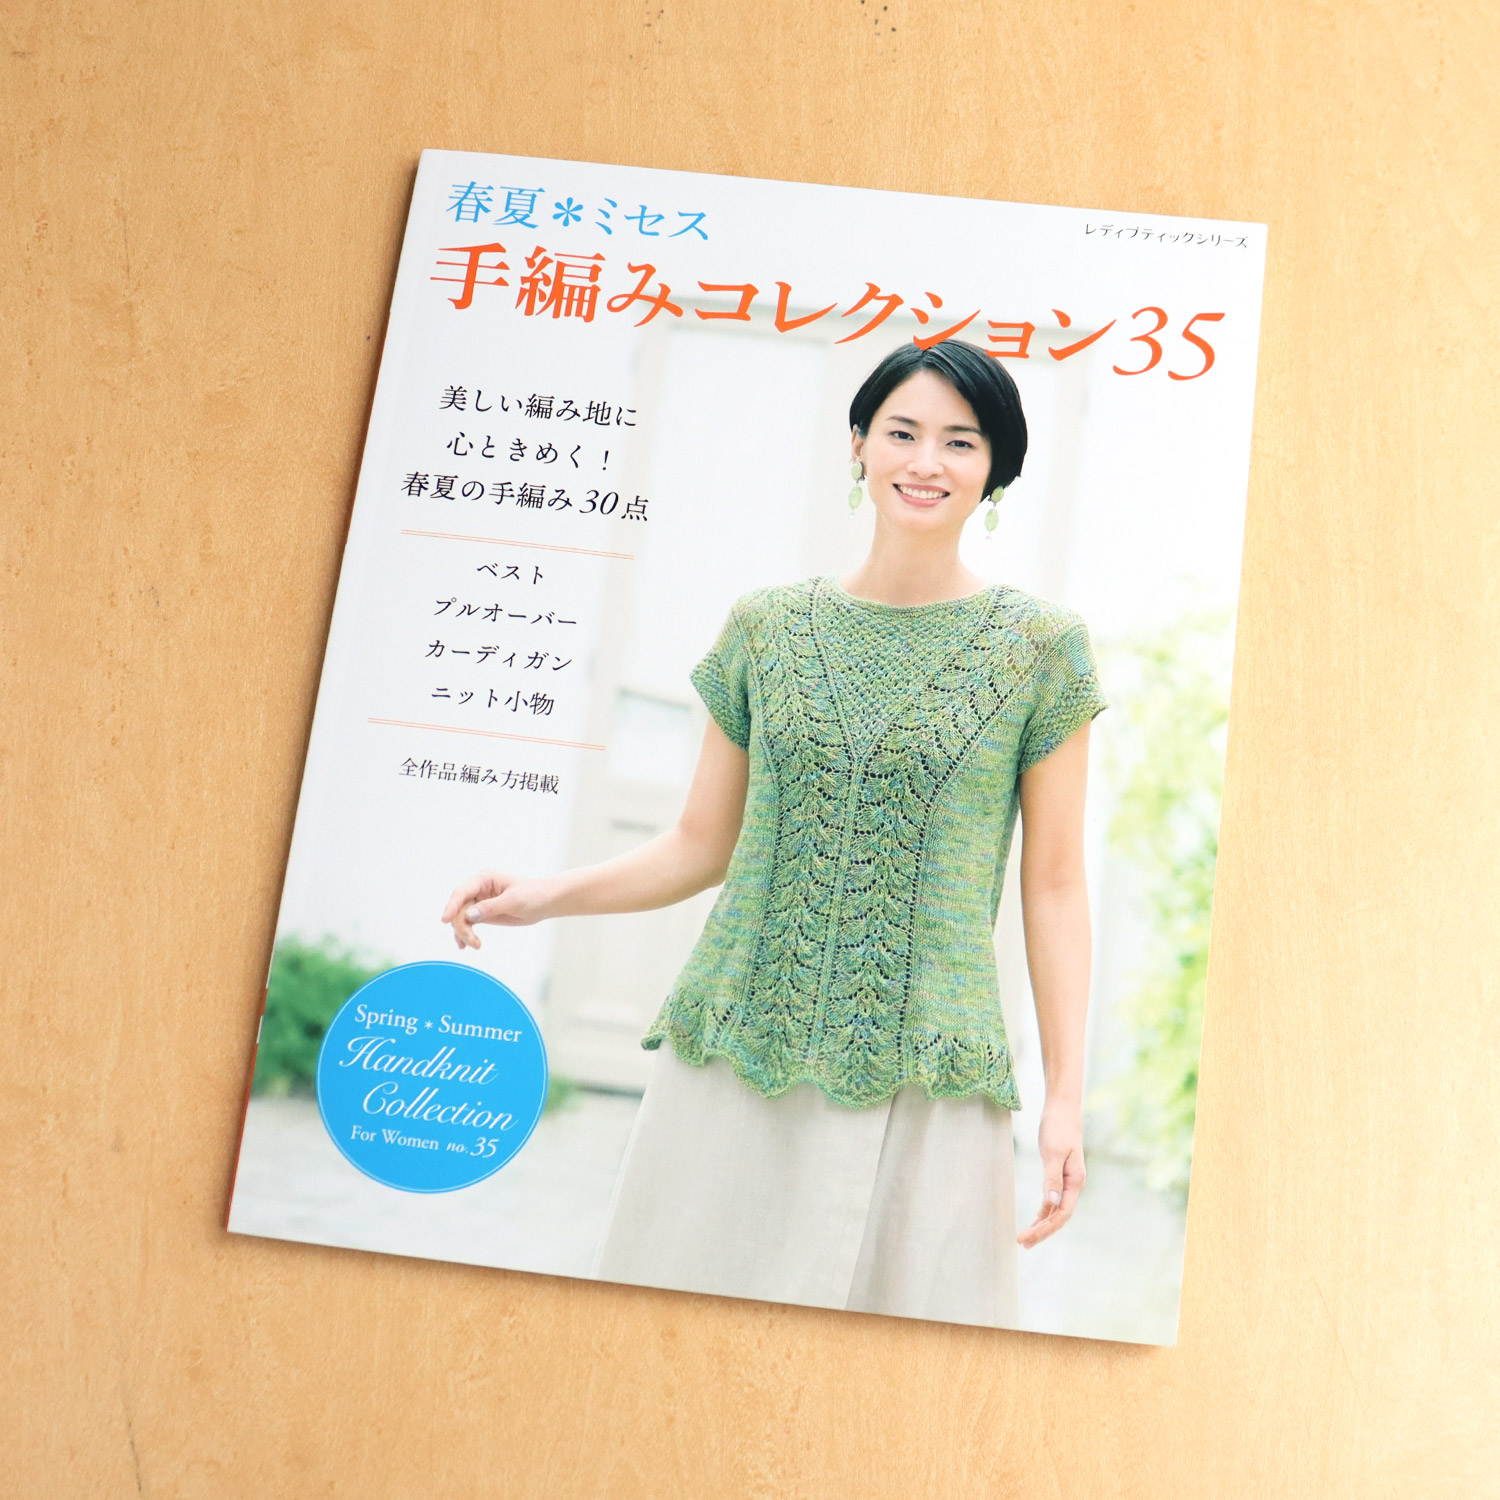 S8488 Spring/Summer*Mrs. Handknitting Collection 35(book)